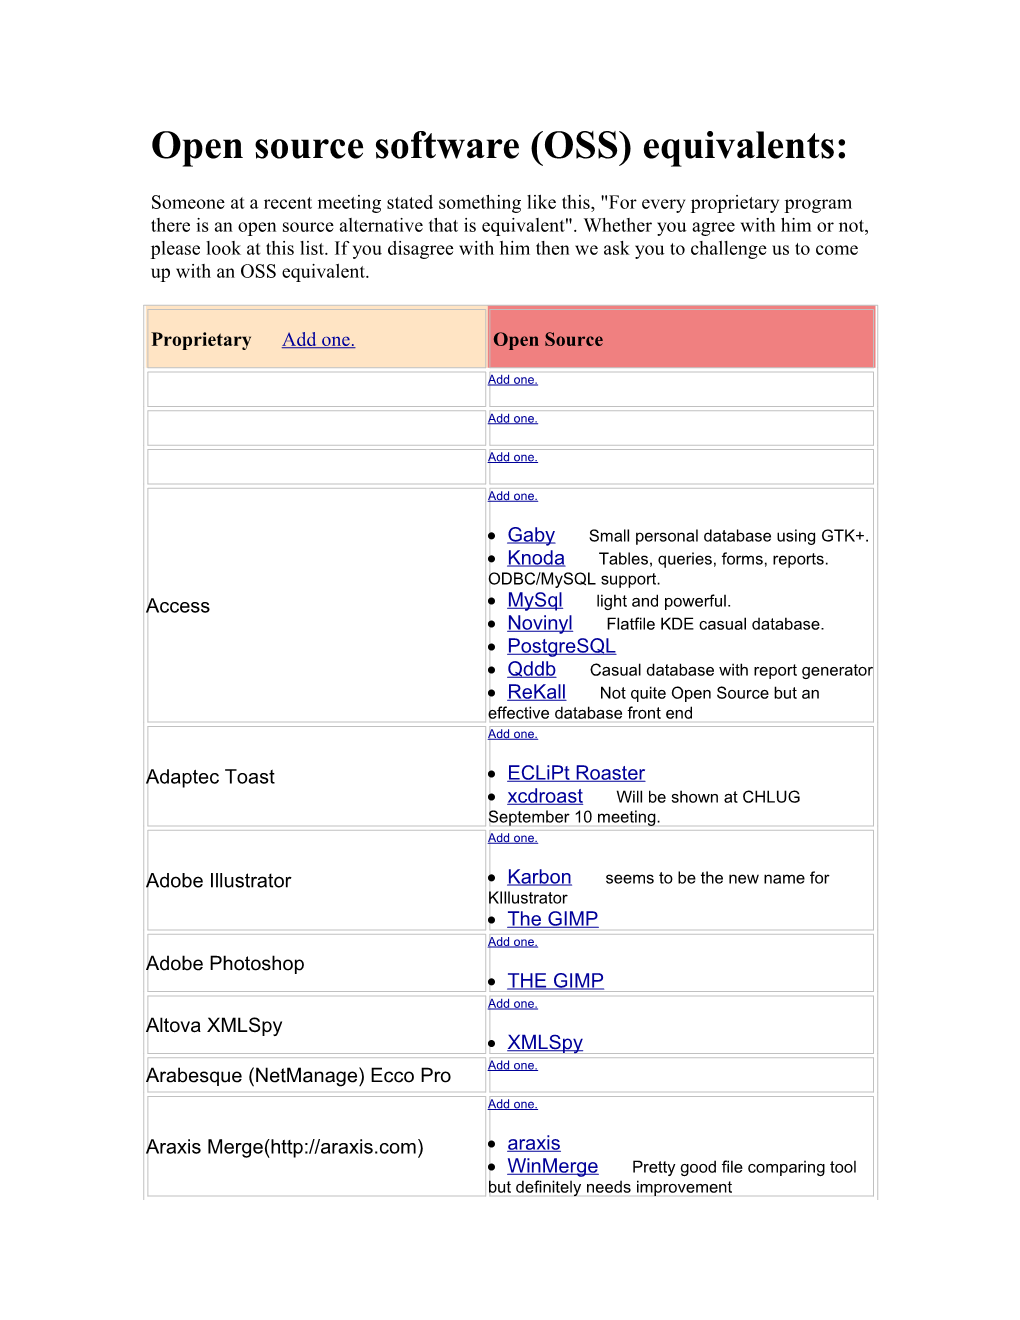 Open Source Software (OSS) Equivalents